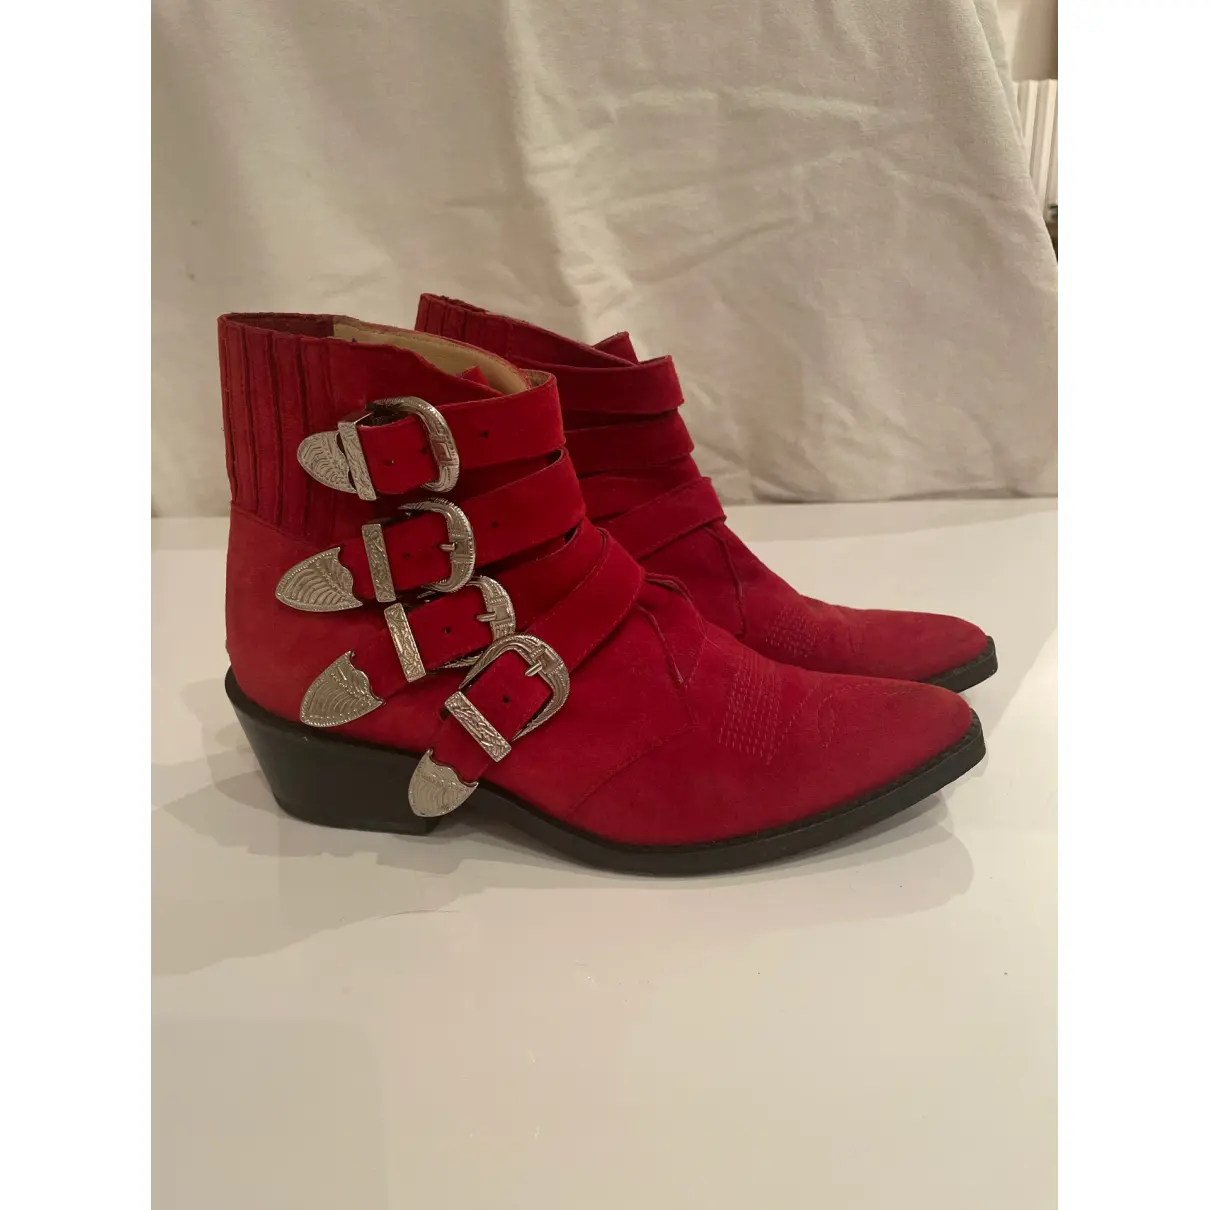 Buy Toga Pulla Leather ankle boots online